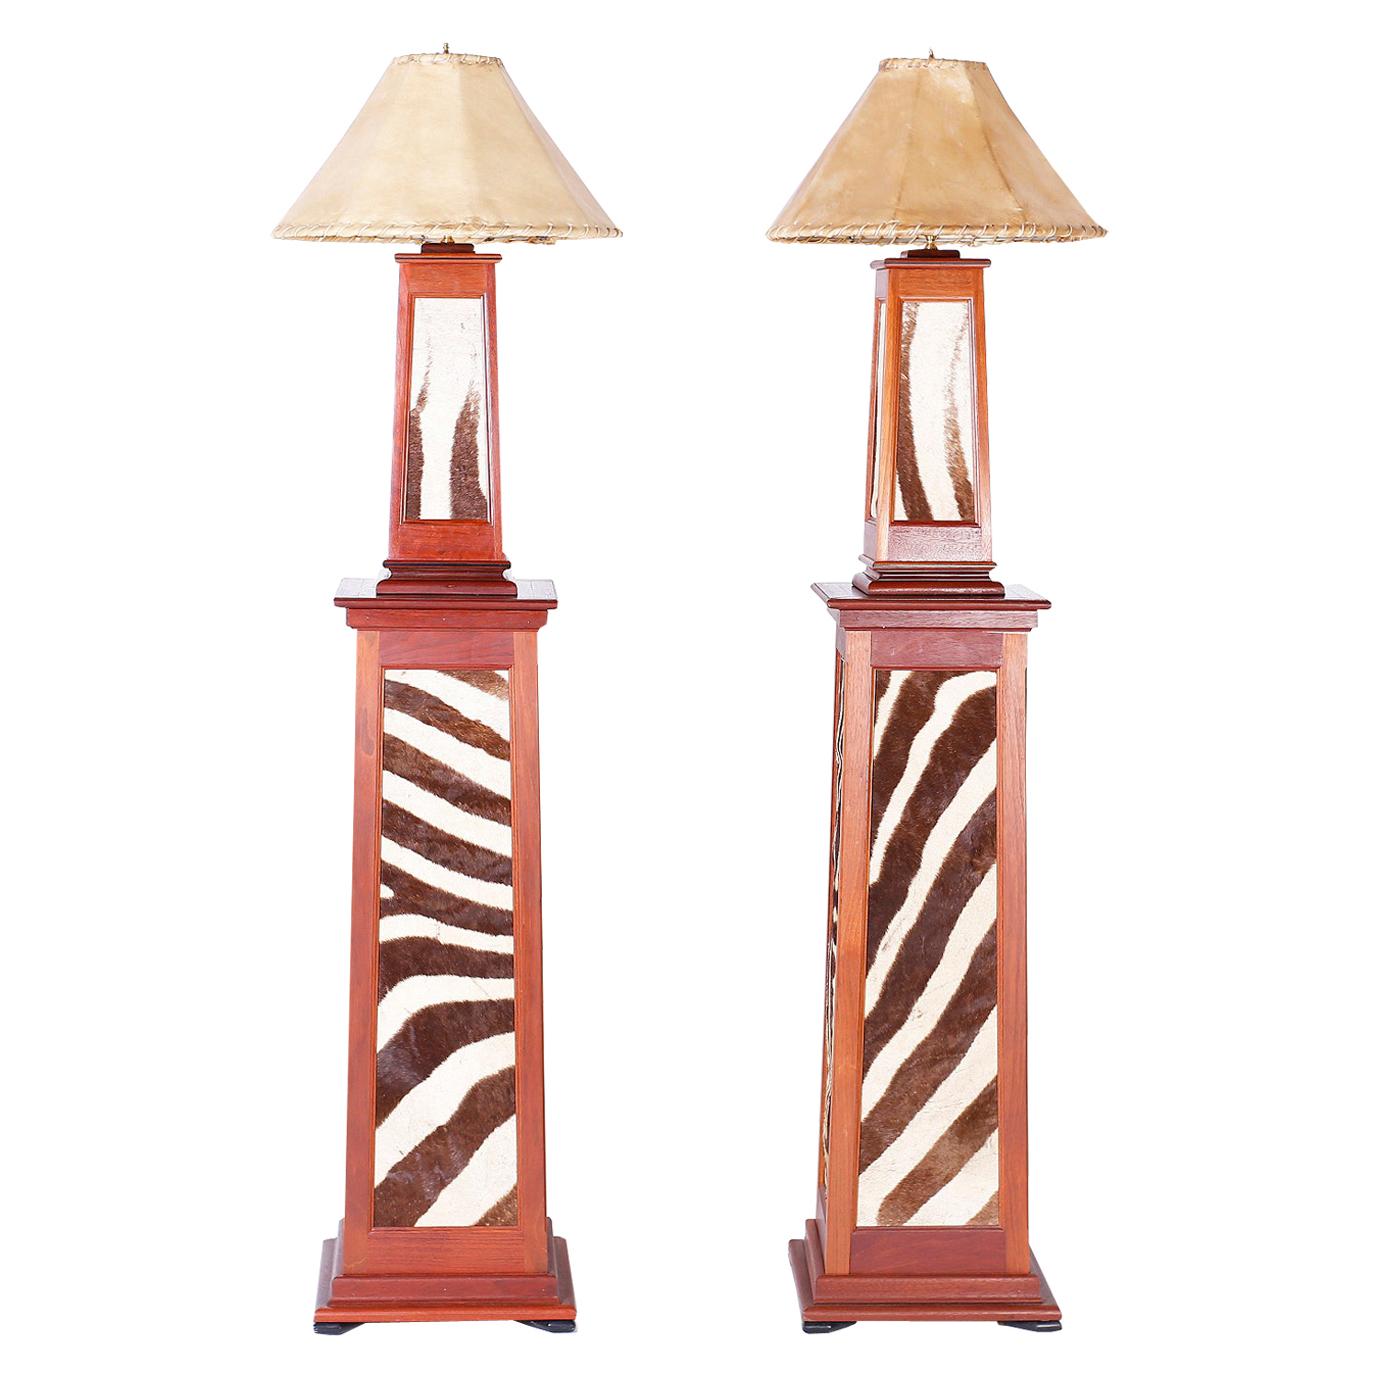 Pair of British Colonial Style Floor Lamps with Zebra Hide